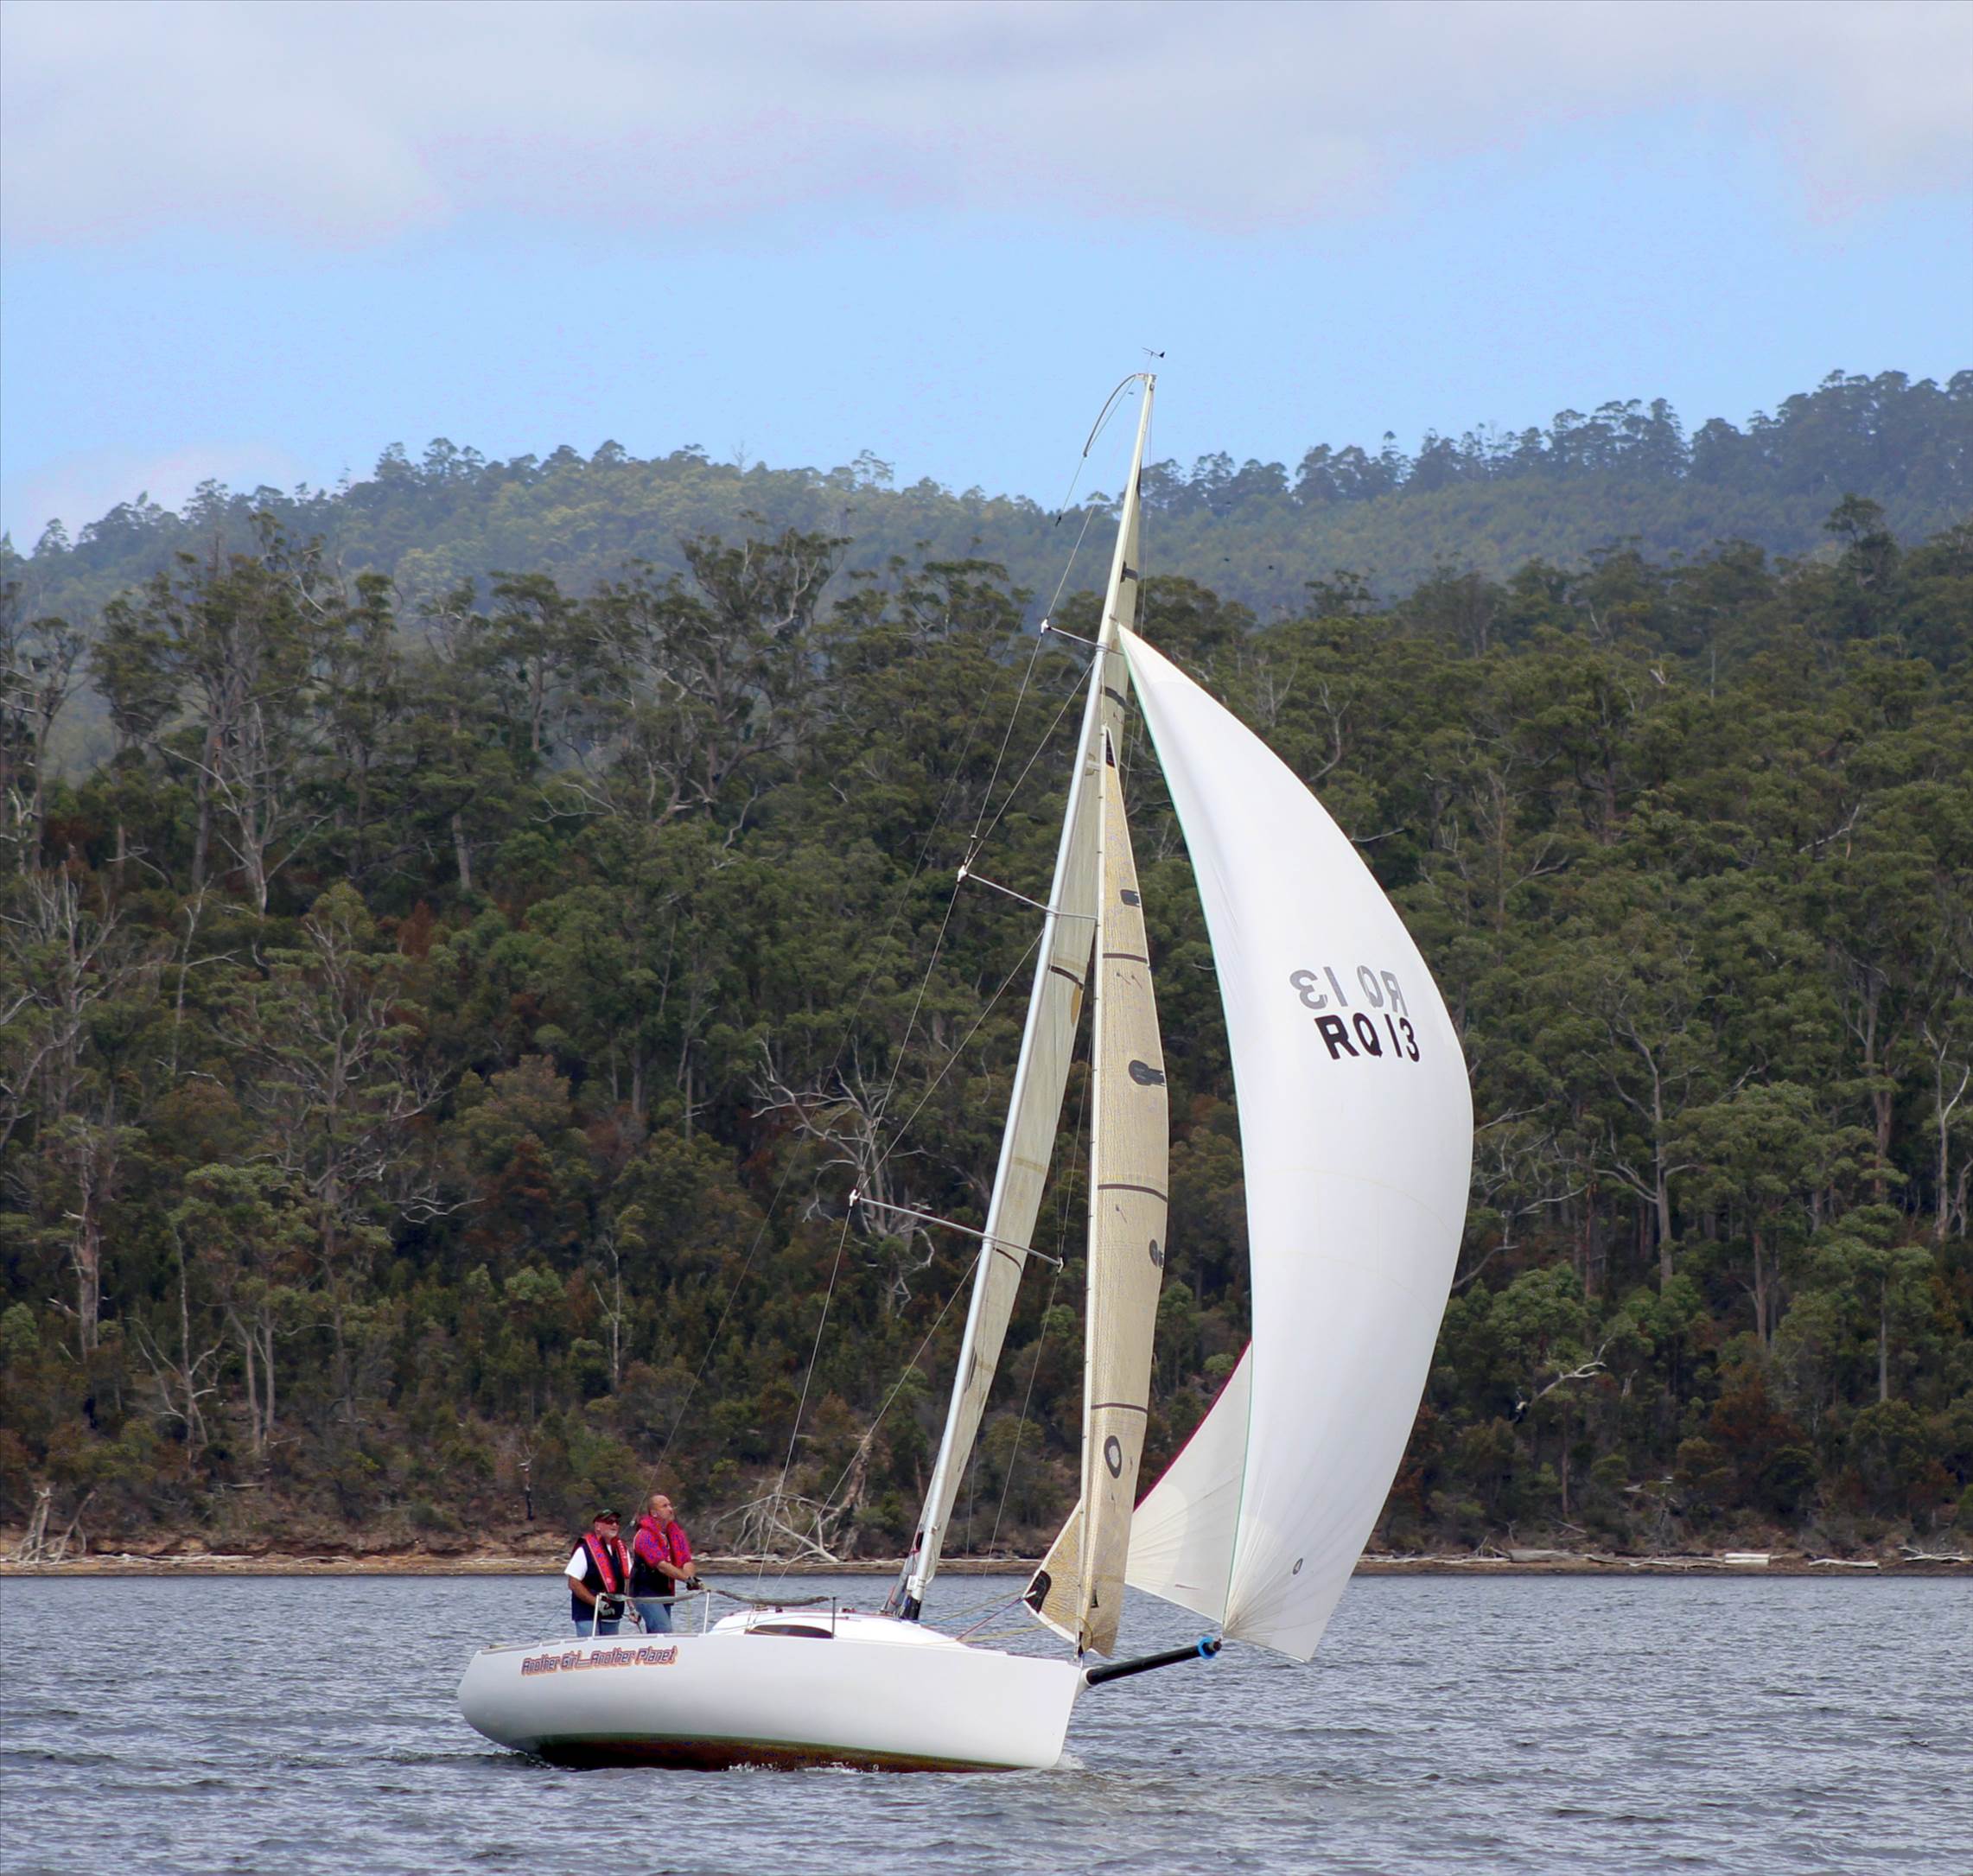 Double spreaders | Sailing Forums, page 1 - Seabreeze